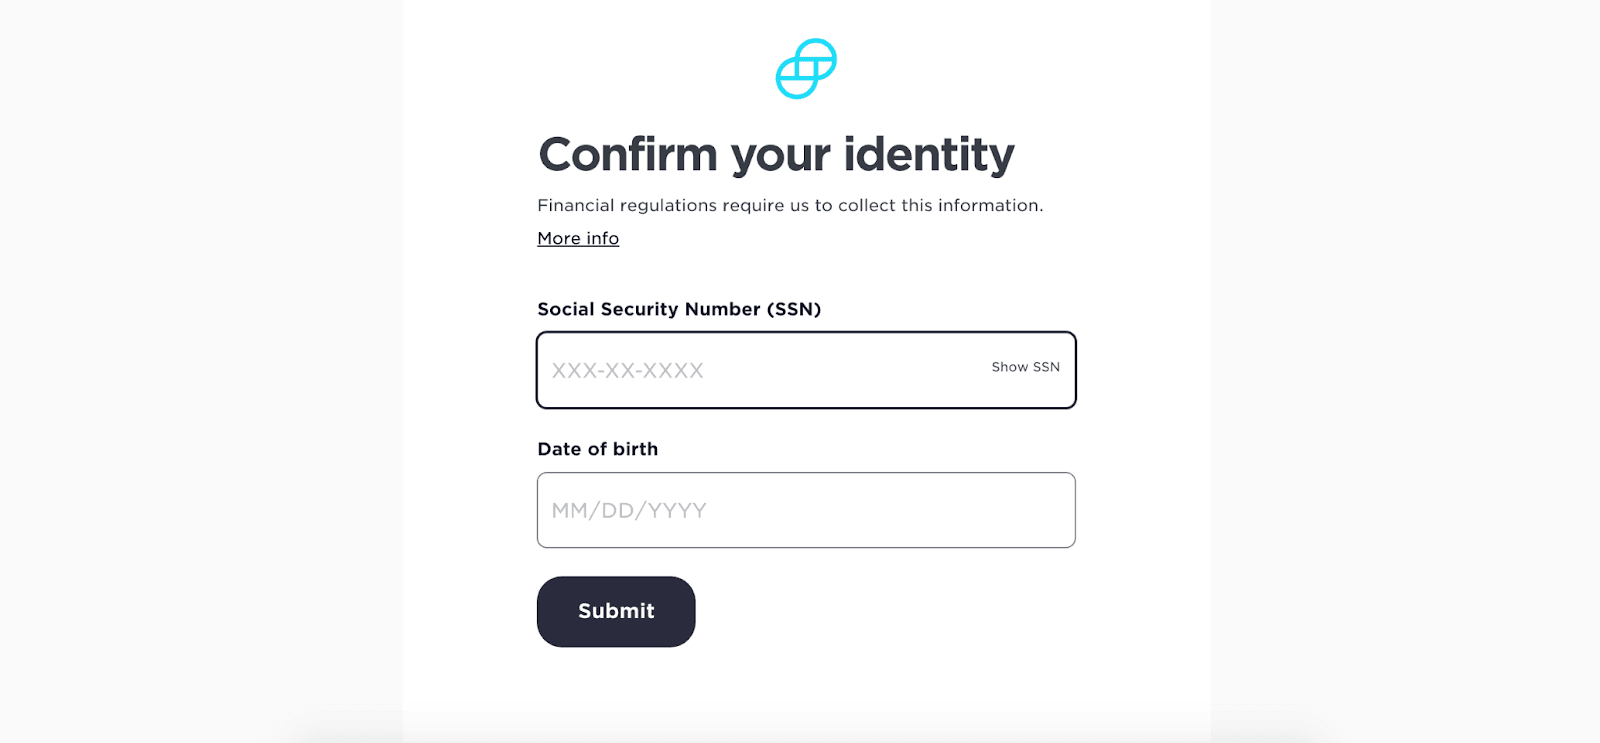 Screenshot of "confirm your identity" Gemini webpage